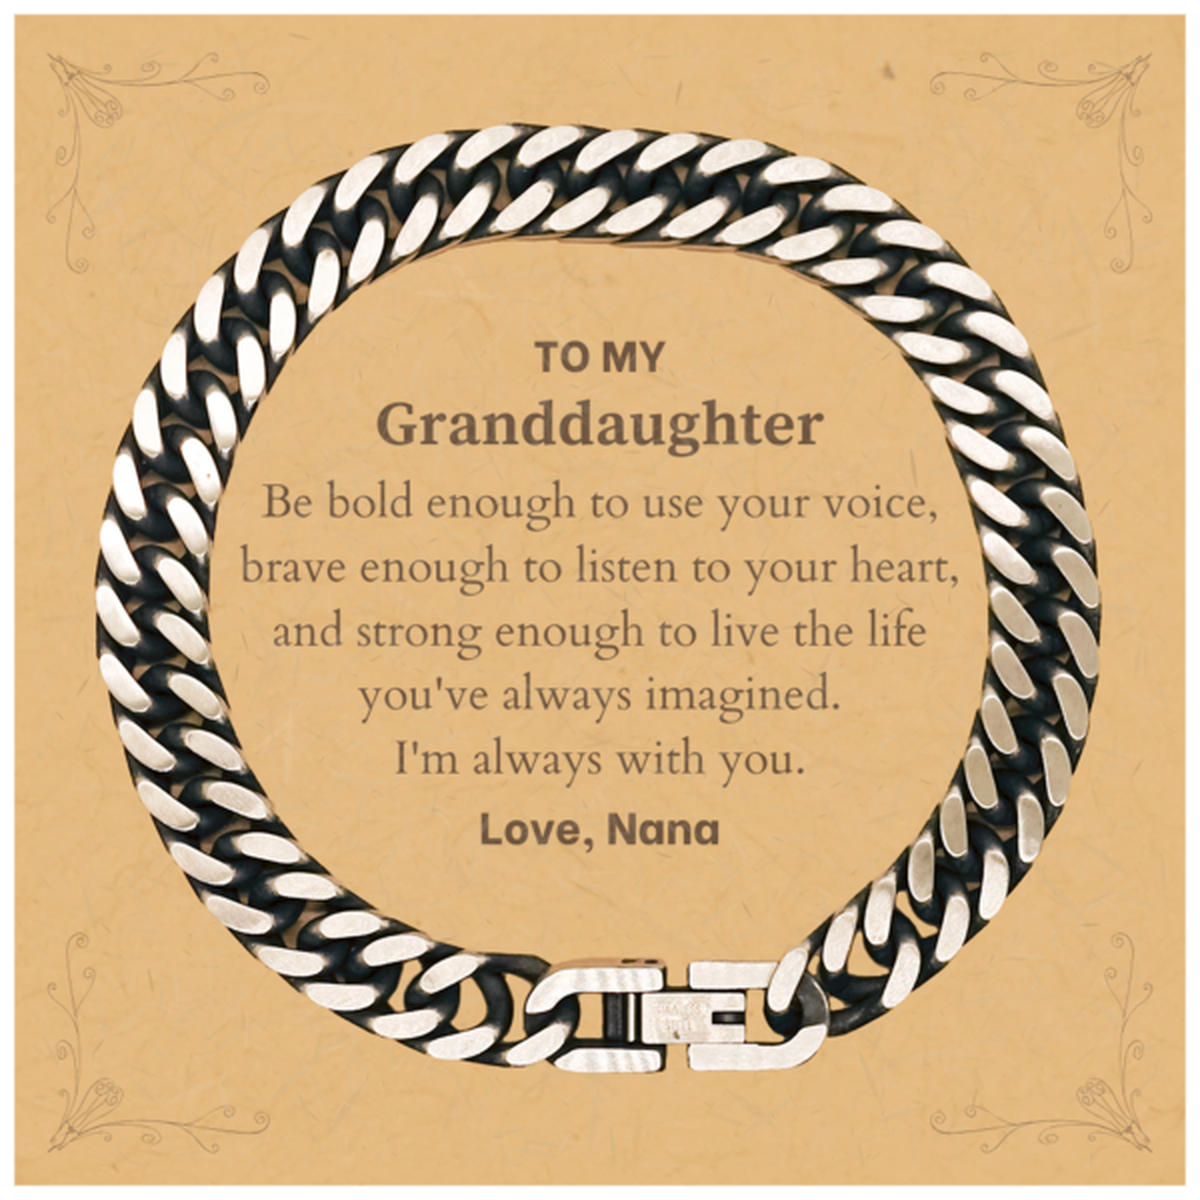 Keepsake Granddaughter Cuban Link Chain Bracelet Gift Idea Graduation Christmas Birthday Granddaughter from Nana, Granddaughter Be bold enough to use your voice, brave enough to listen to your heart. Love, Nana